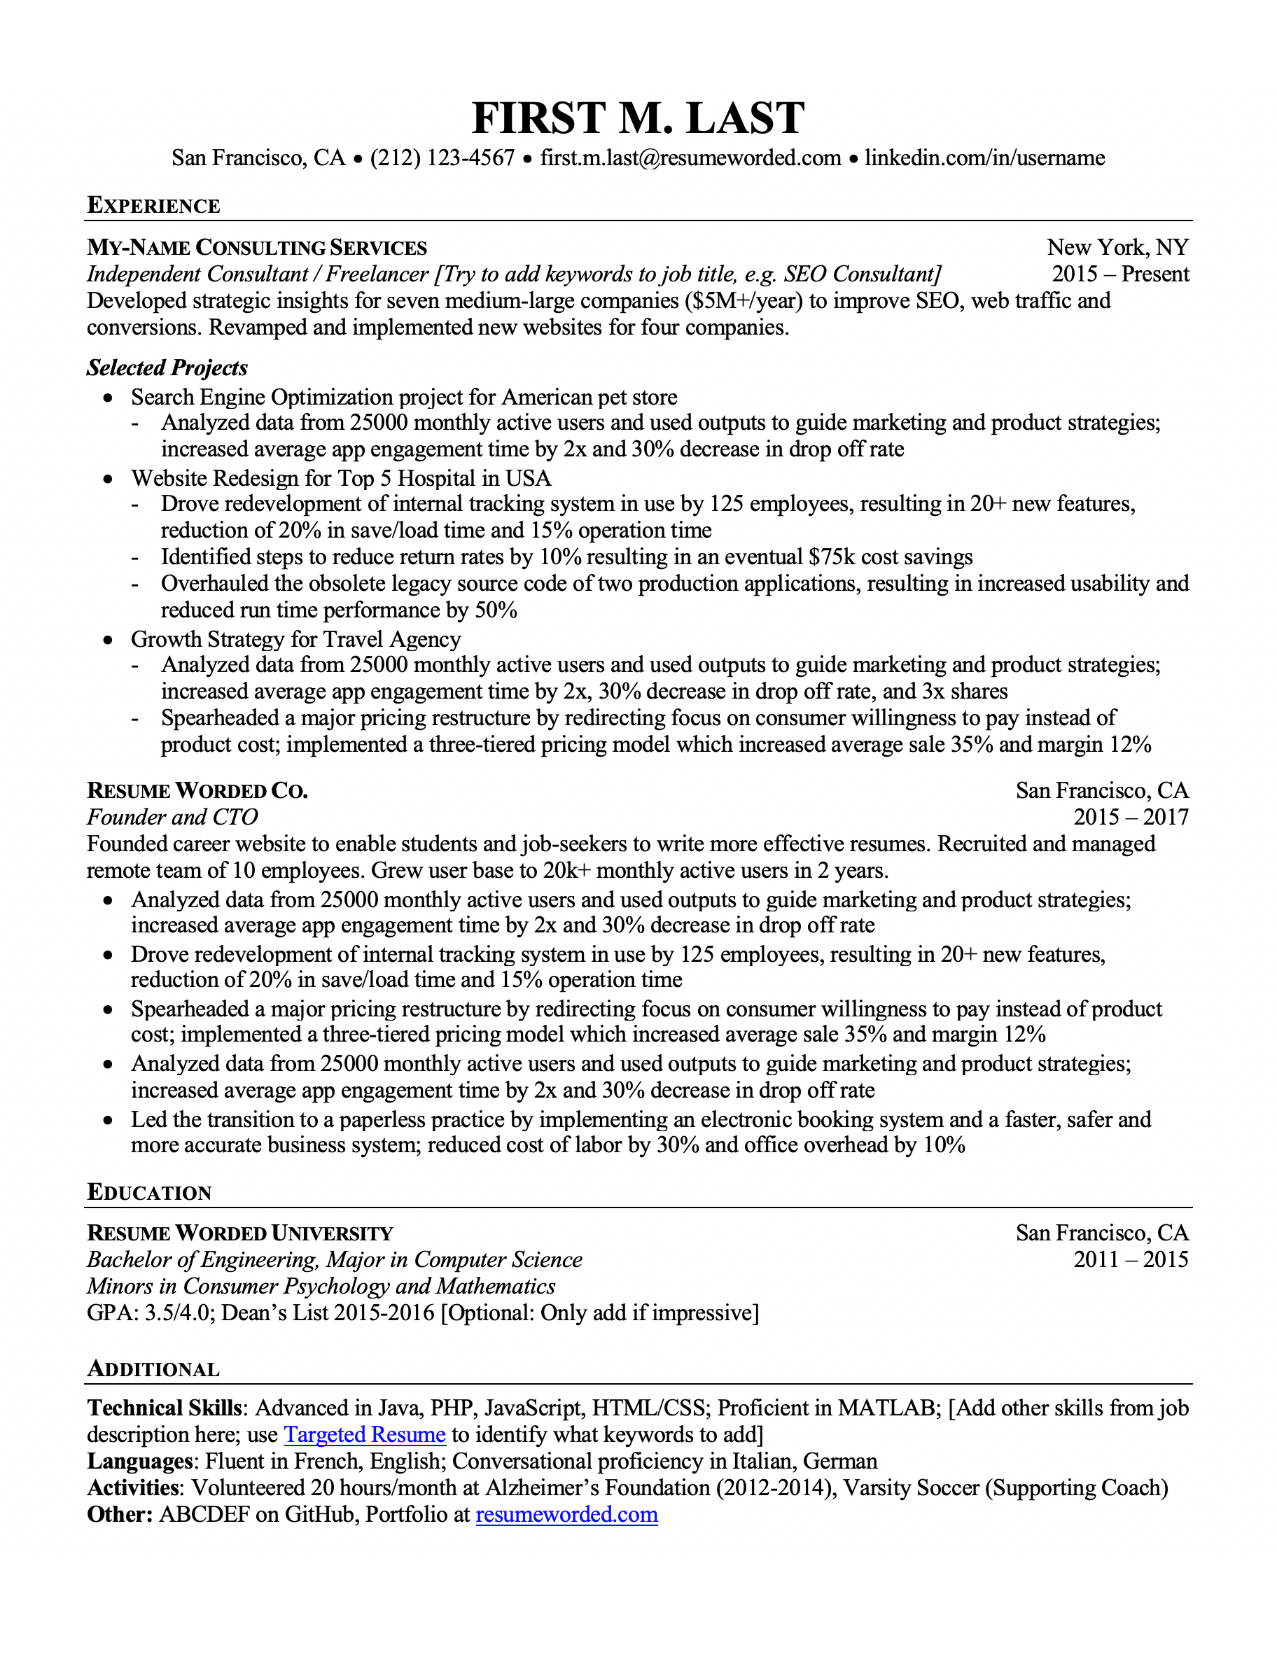 Resume template for a part-time job 